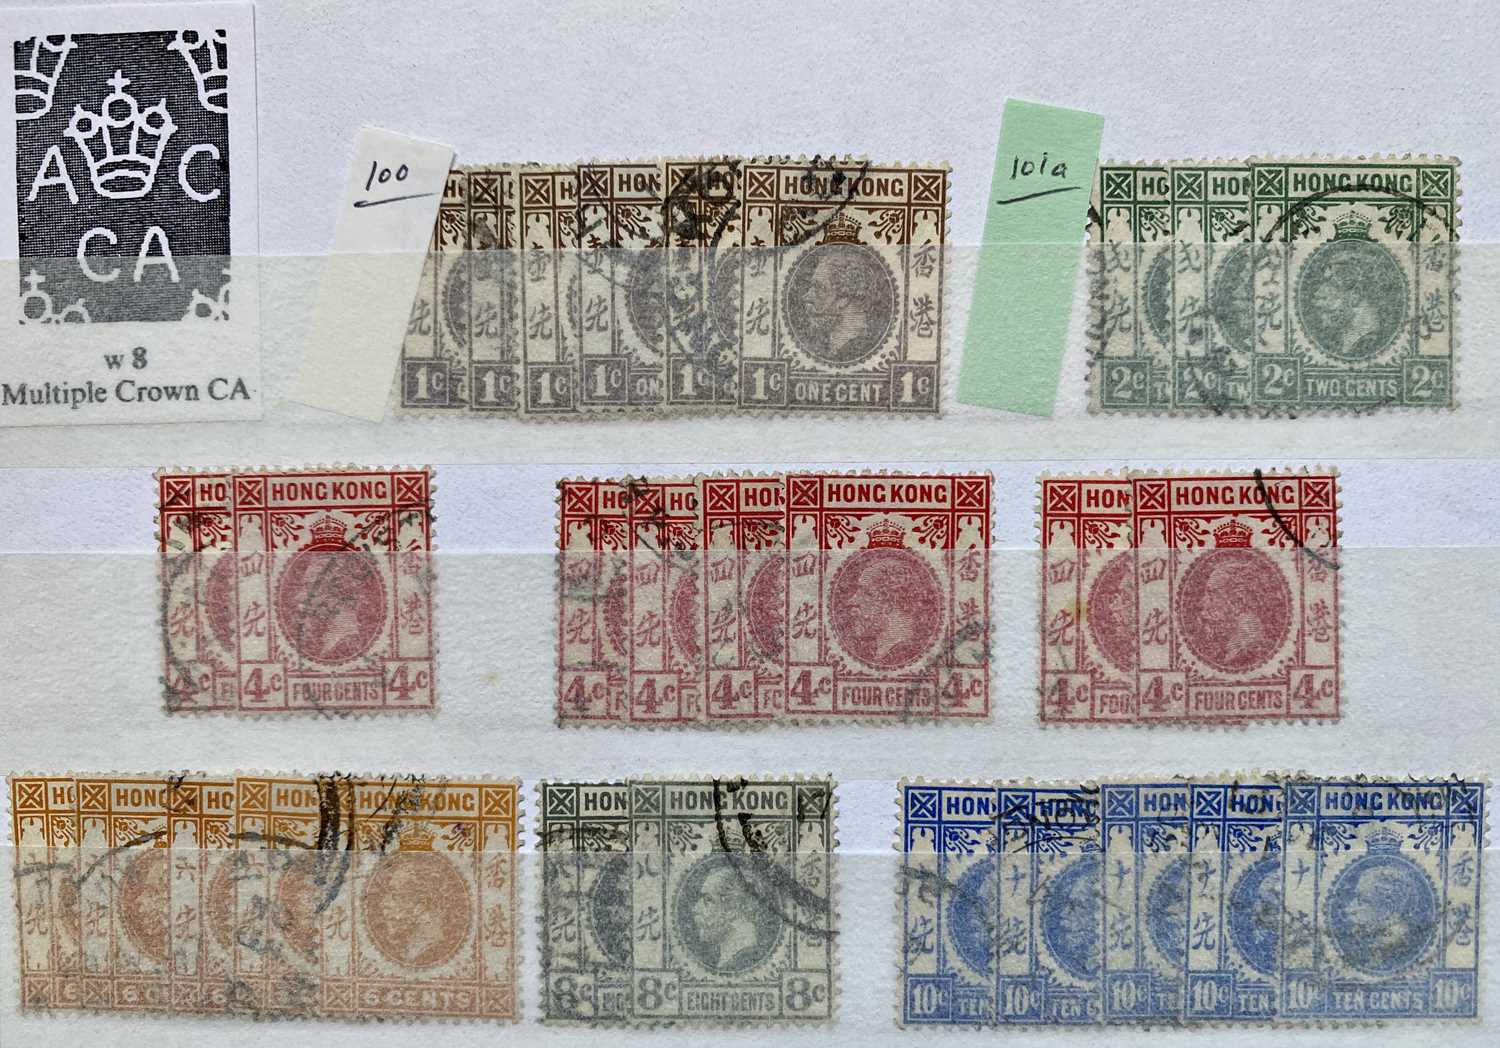 VERY GOOD HONG KONG UNMOUNTED MINT & FINE USED HIGH CAT VALUE, OVERPRINTS ETC - Image 14 of 19